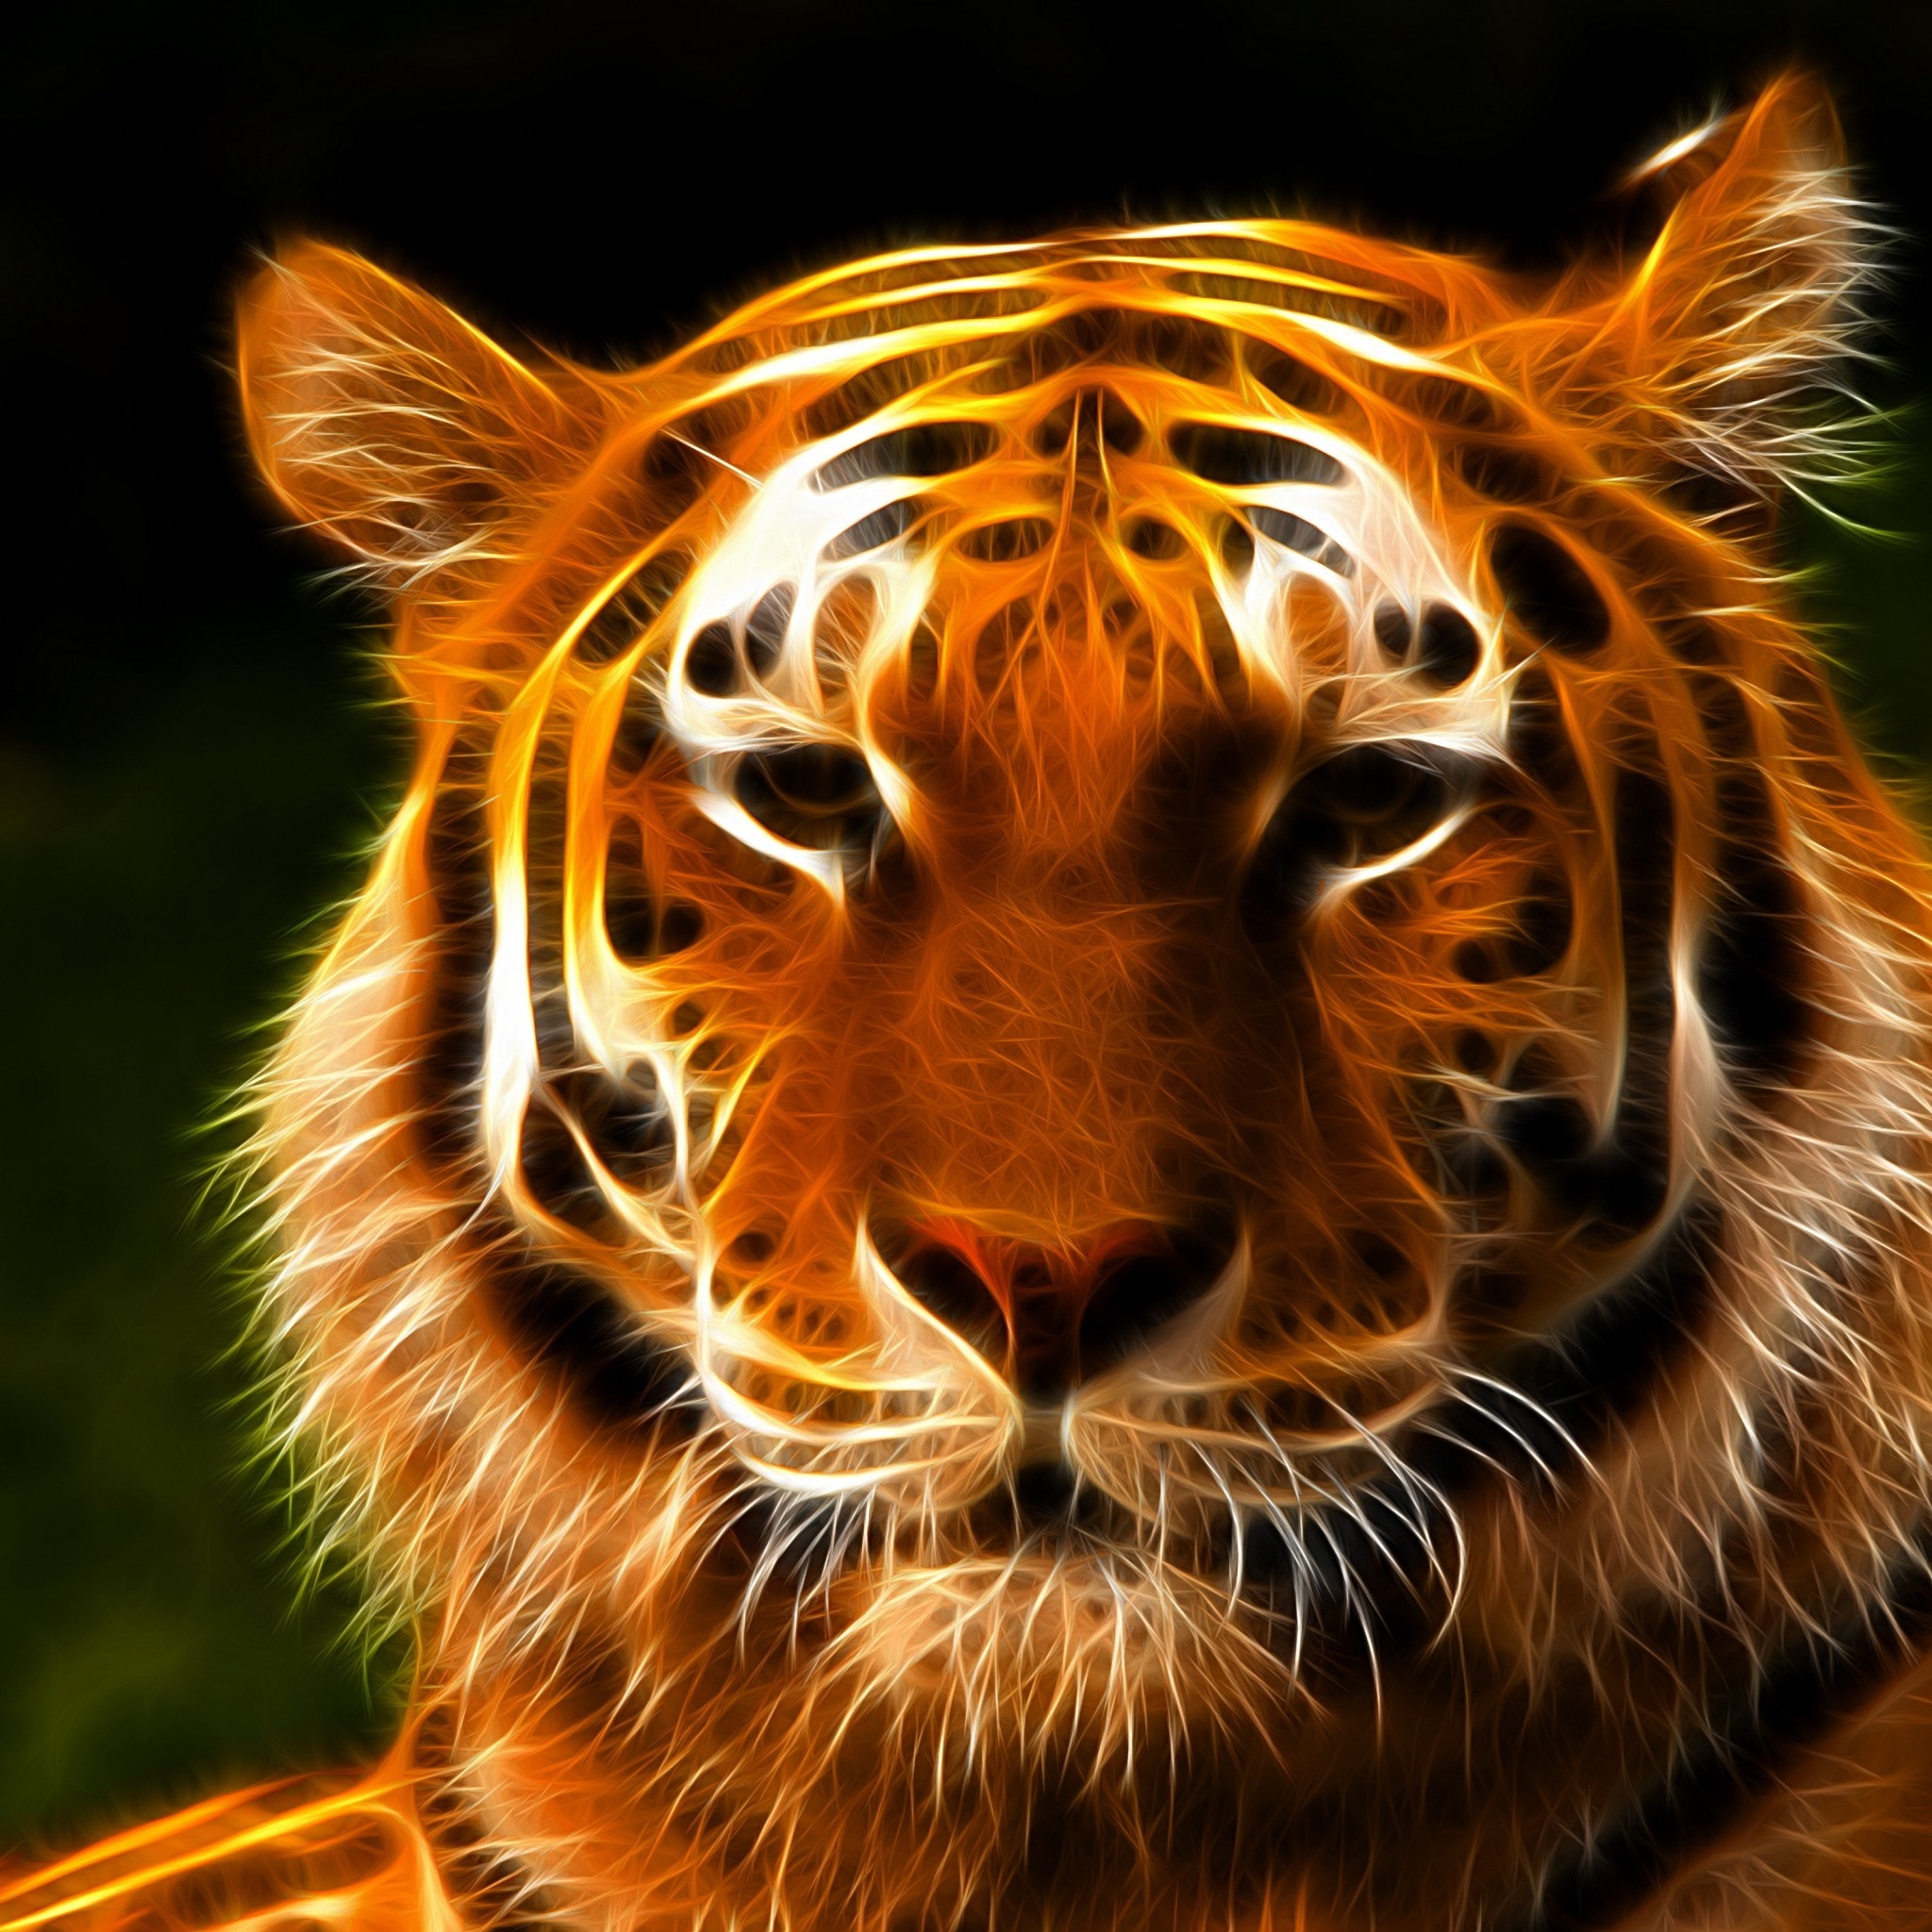 Tiger Face Art for 2048 x 2048 New iPad resolution